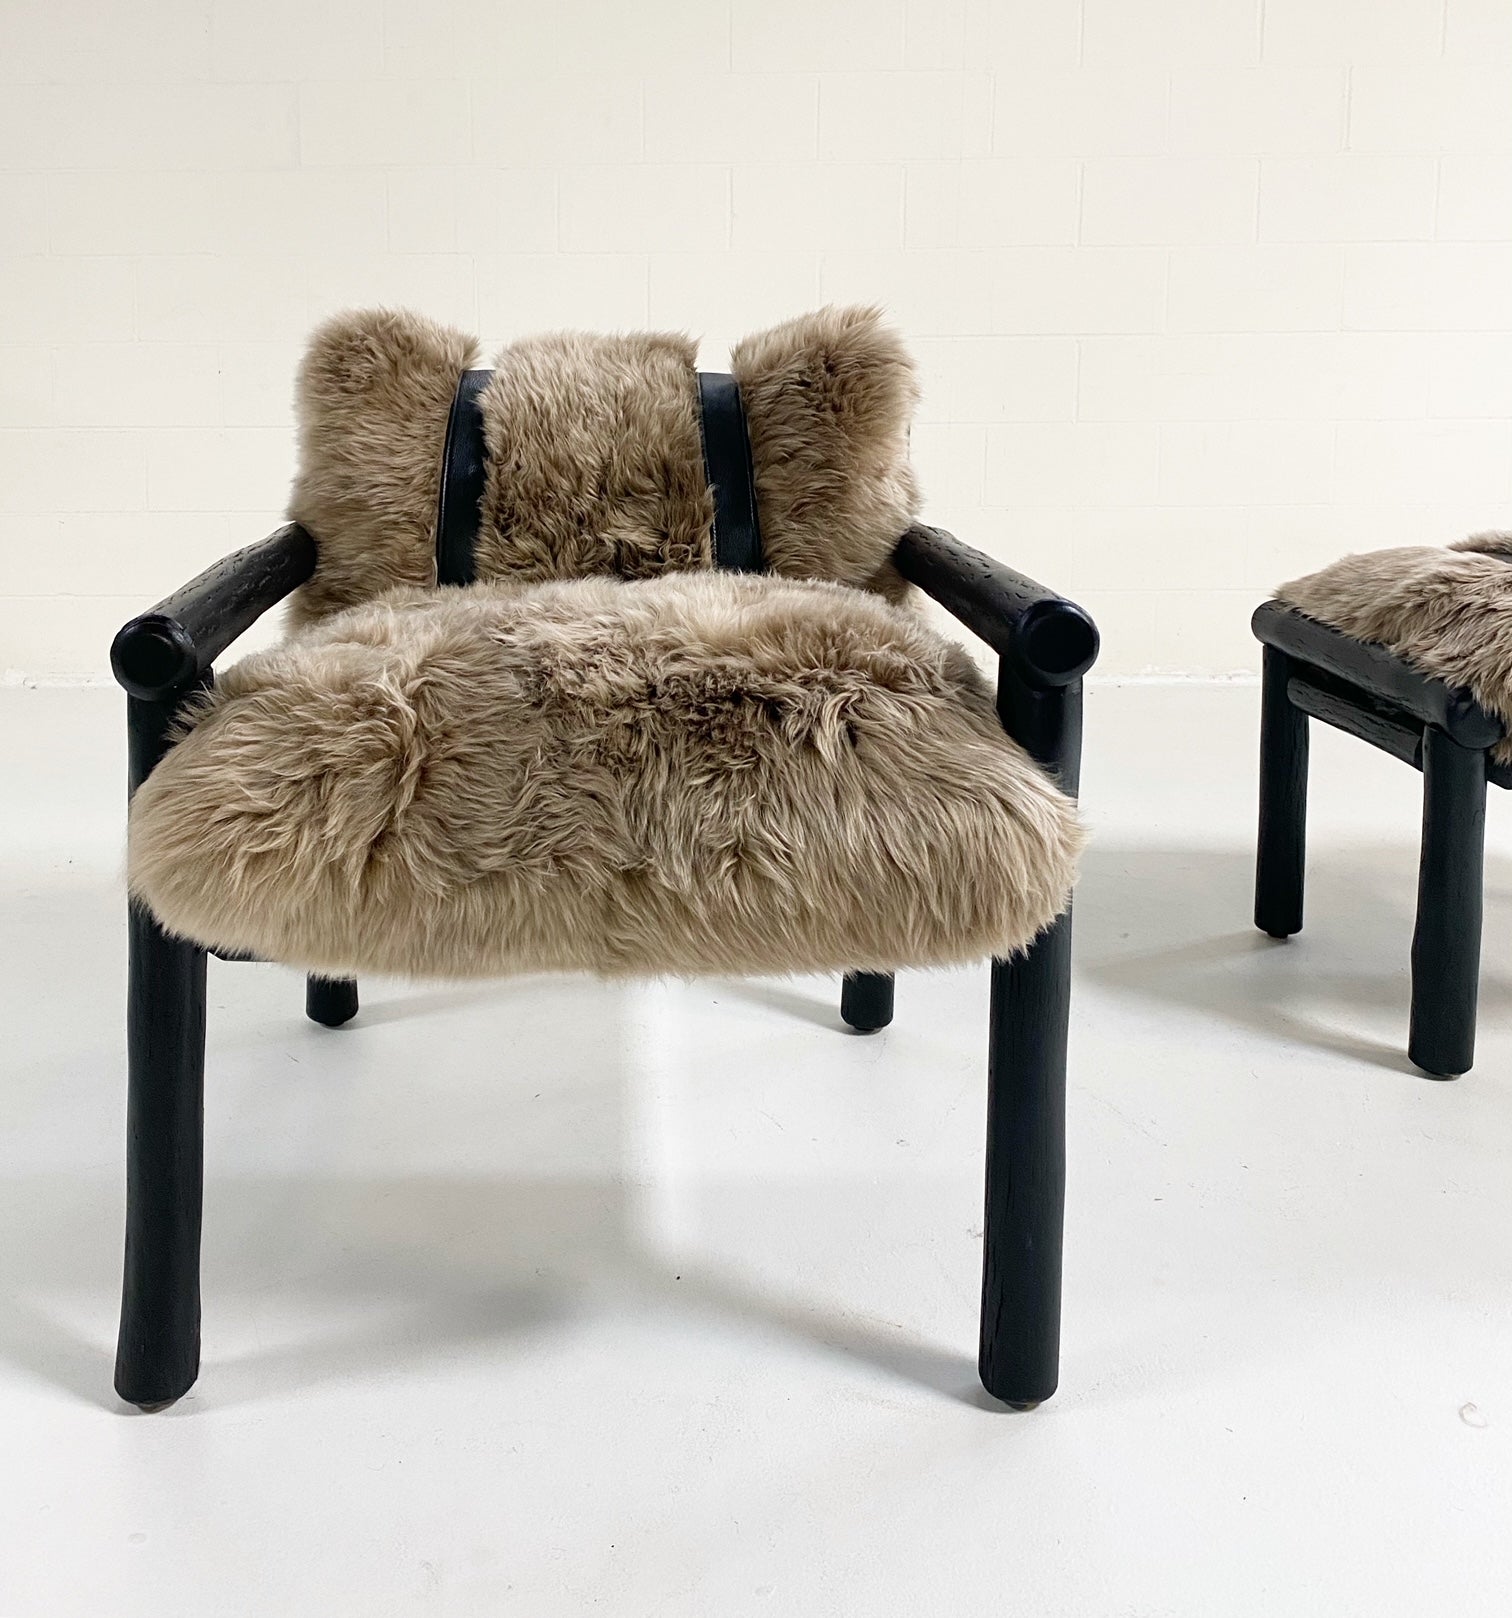 Black Butte Chair and Ottoman with Sheepskin Cushions